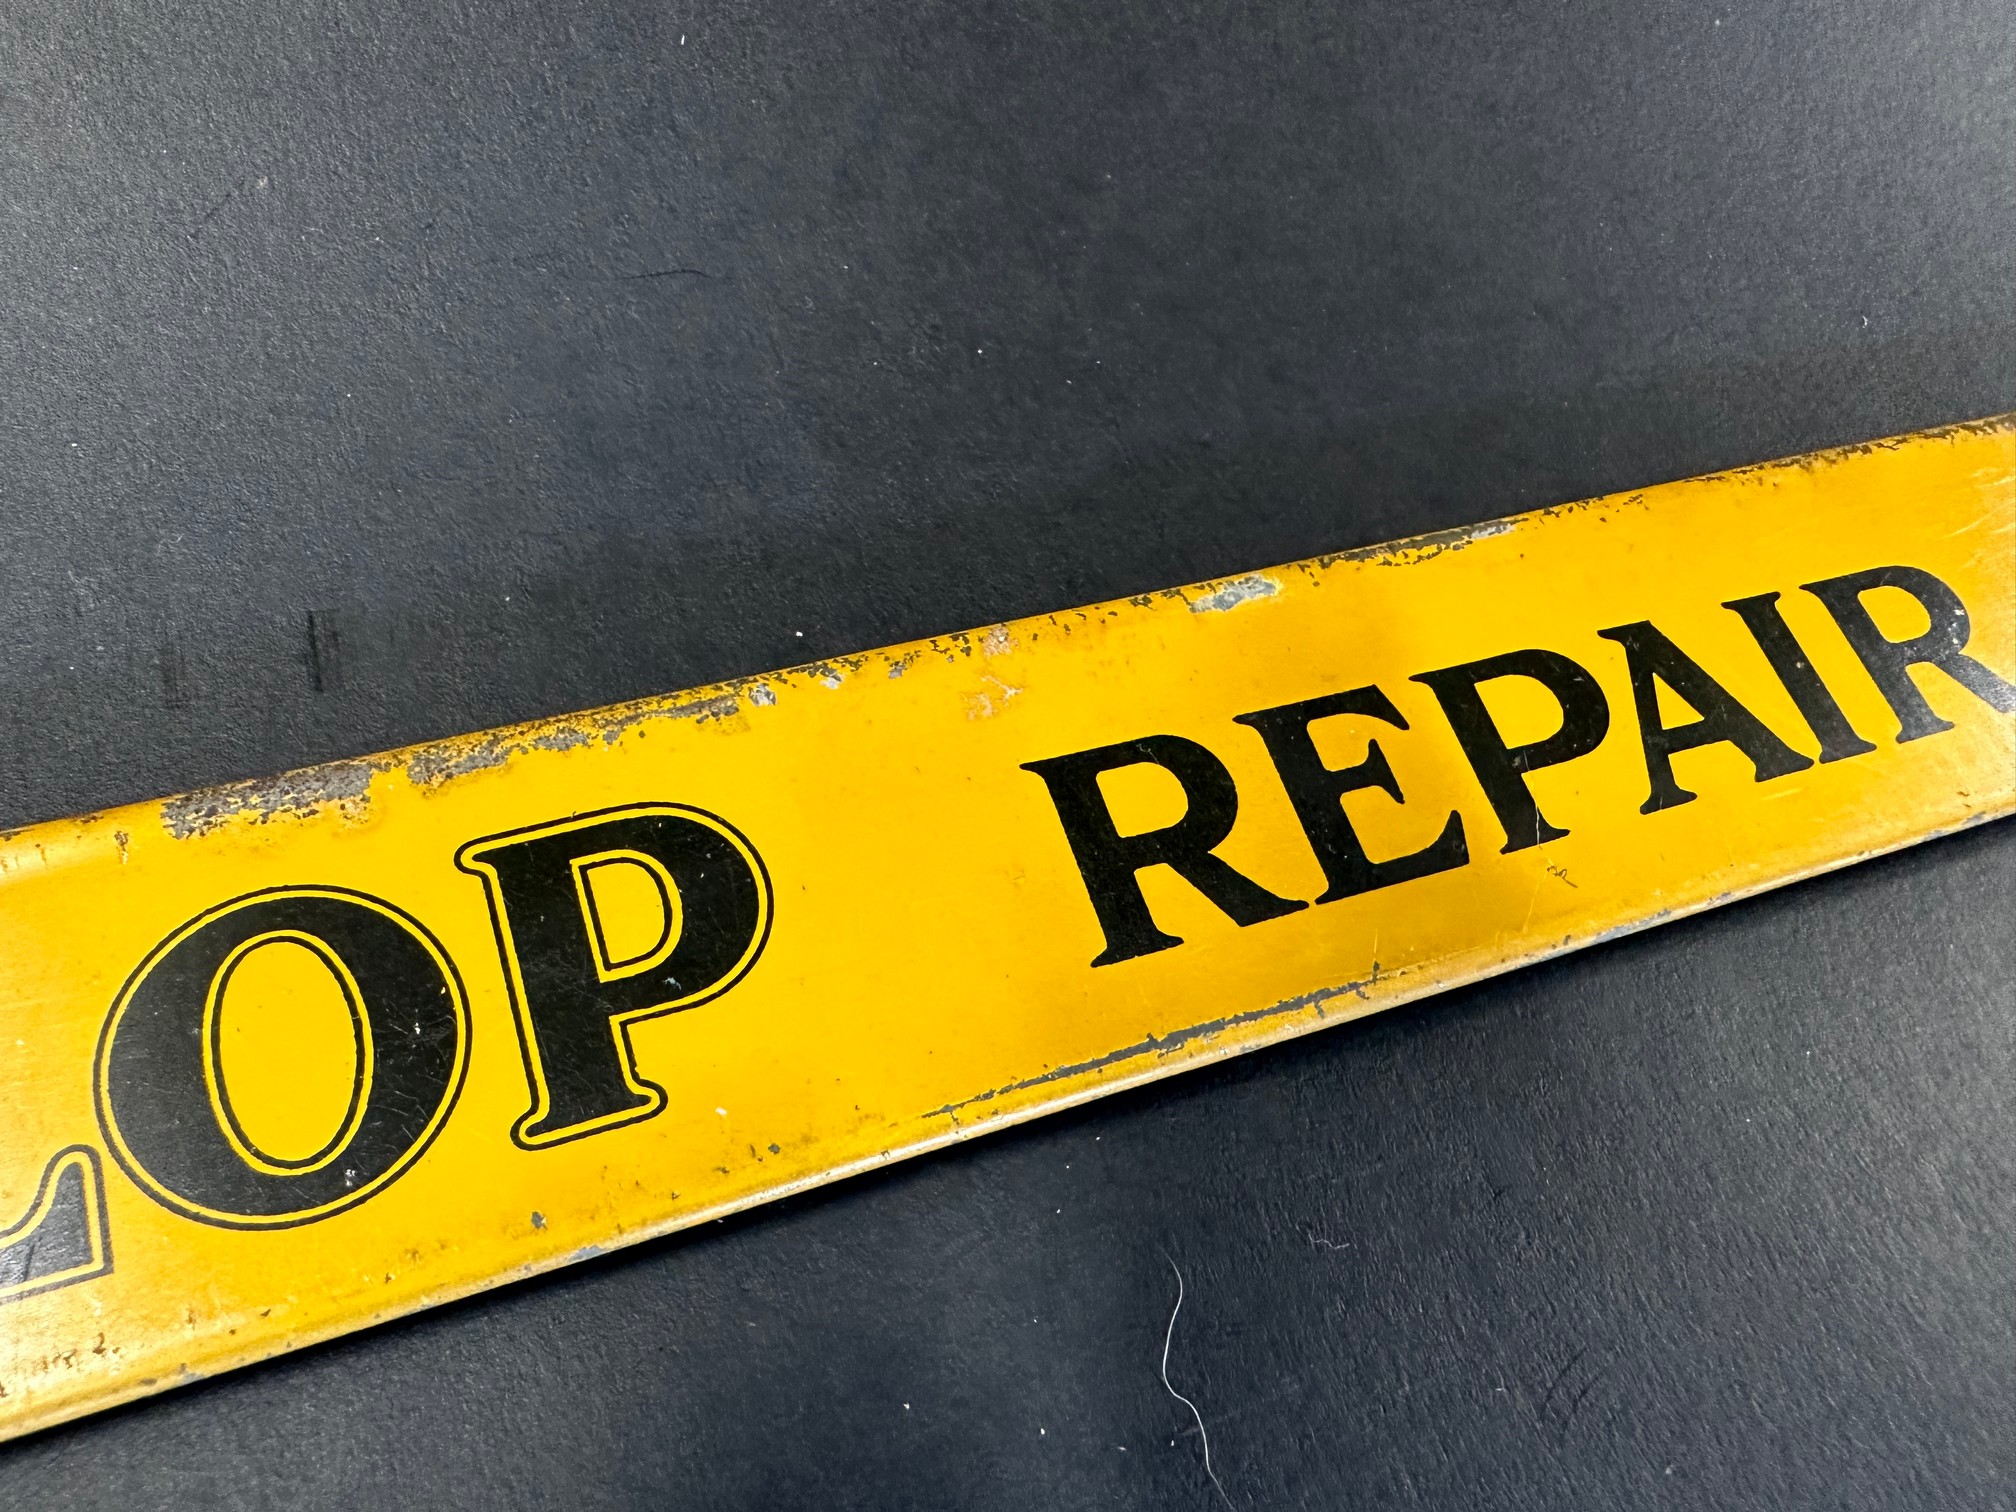 A Dunlop Repair Outfits shelf strip in good condition. - Image 3 of 5